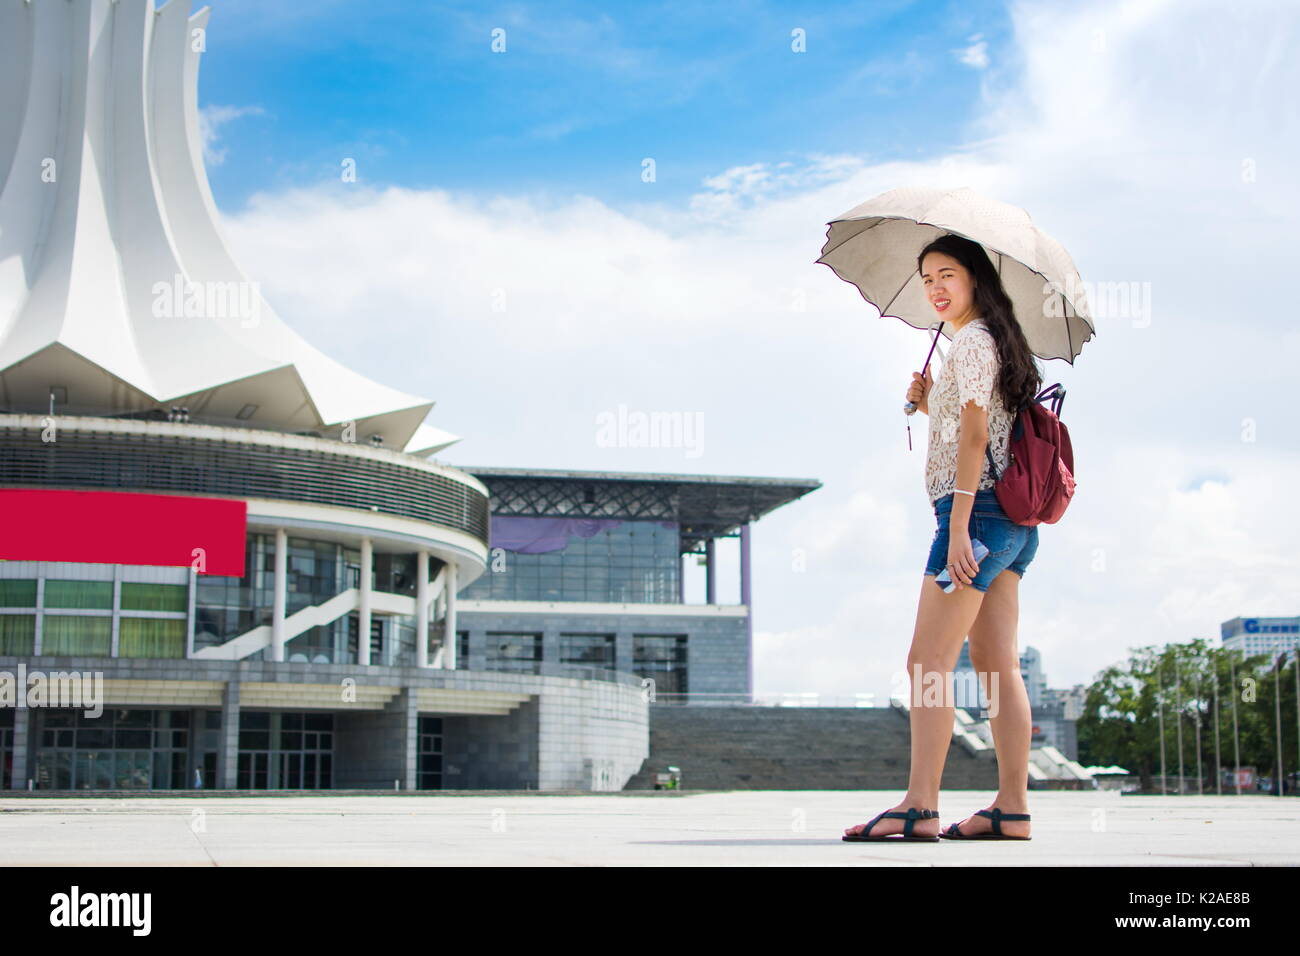 Asian tourist holding umbrella to protect from the strong sun Stock Photo